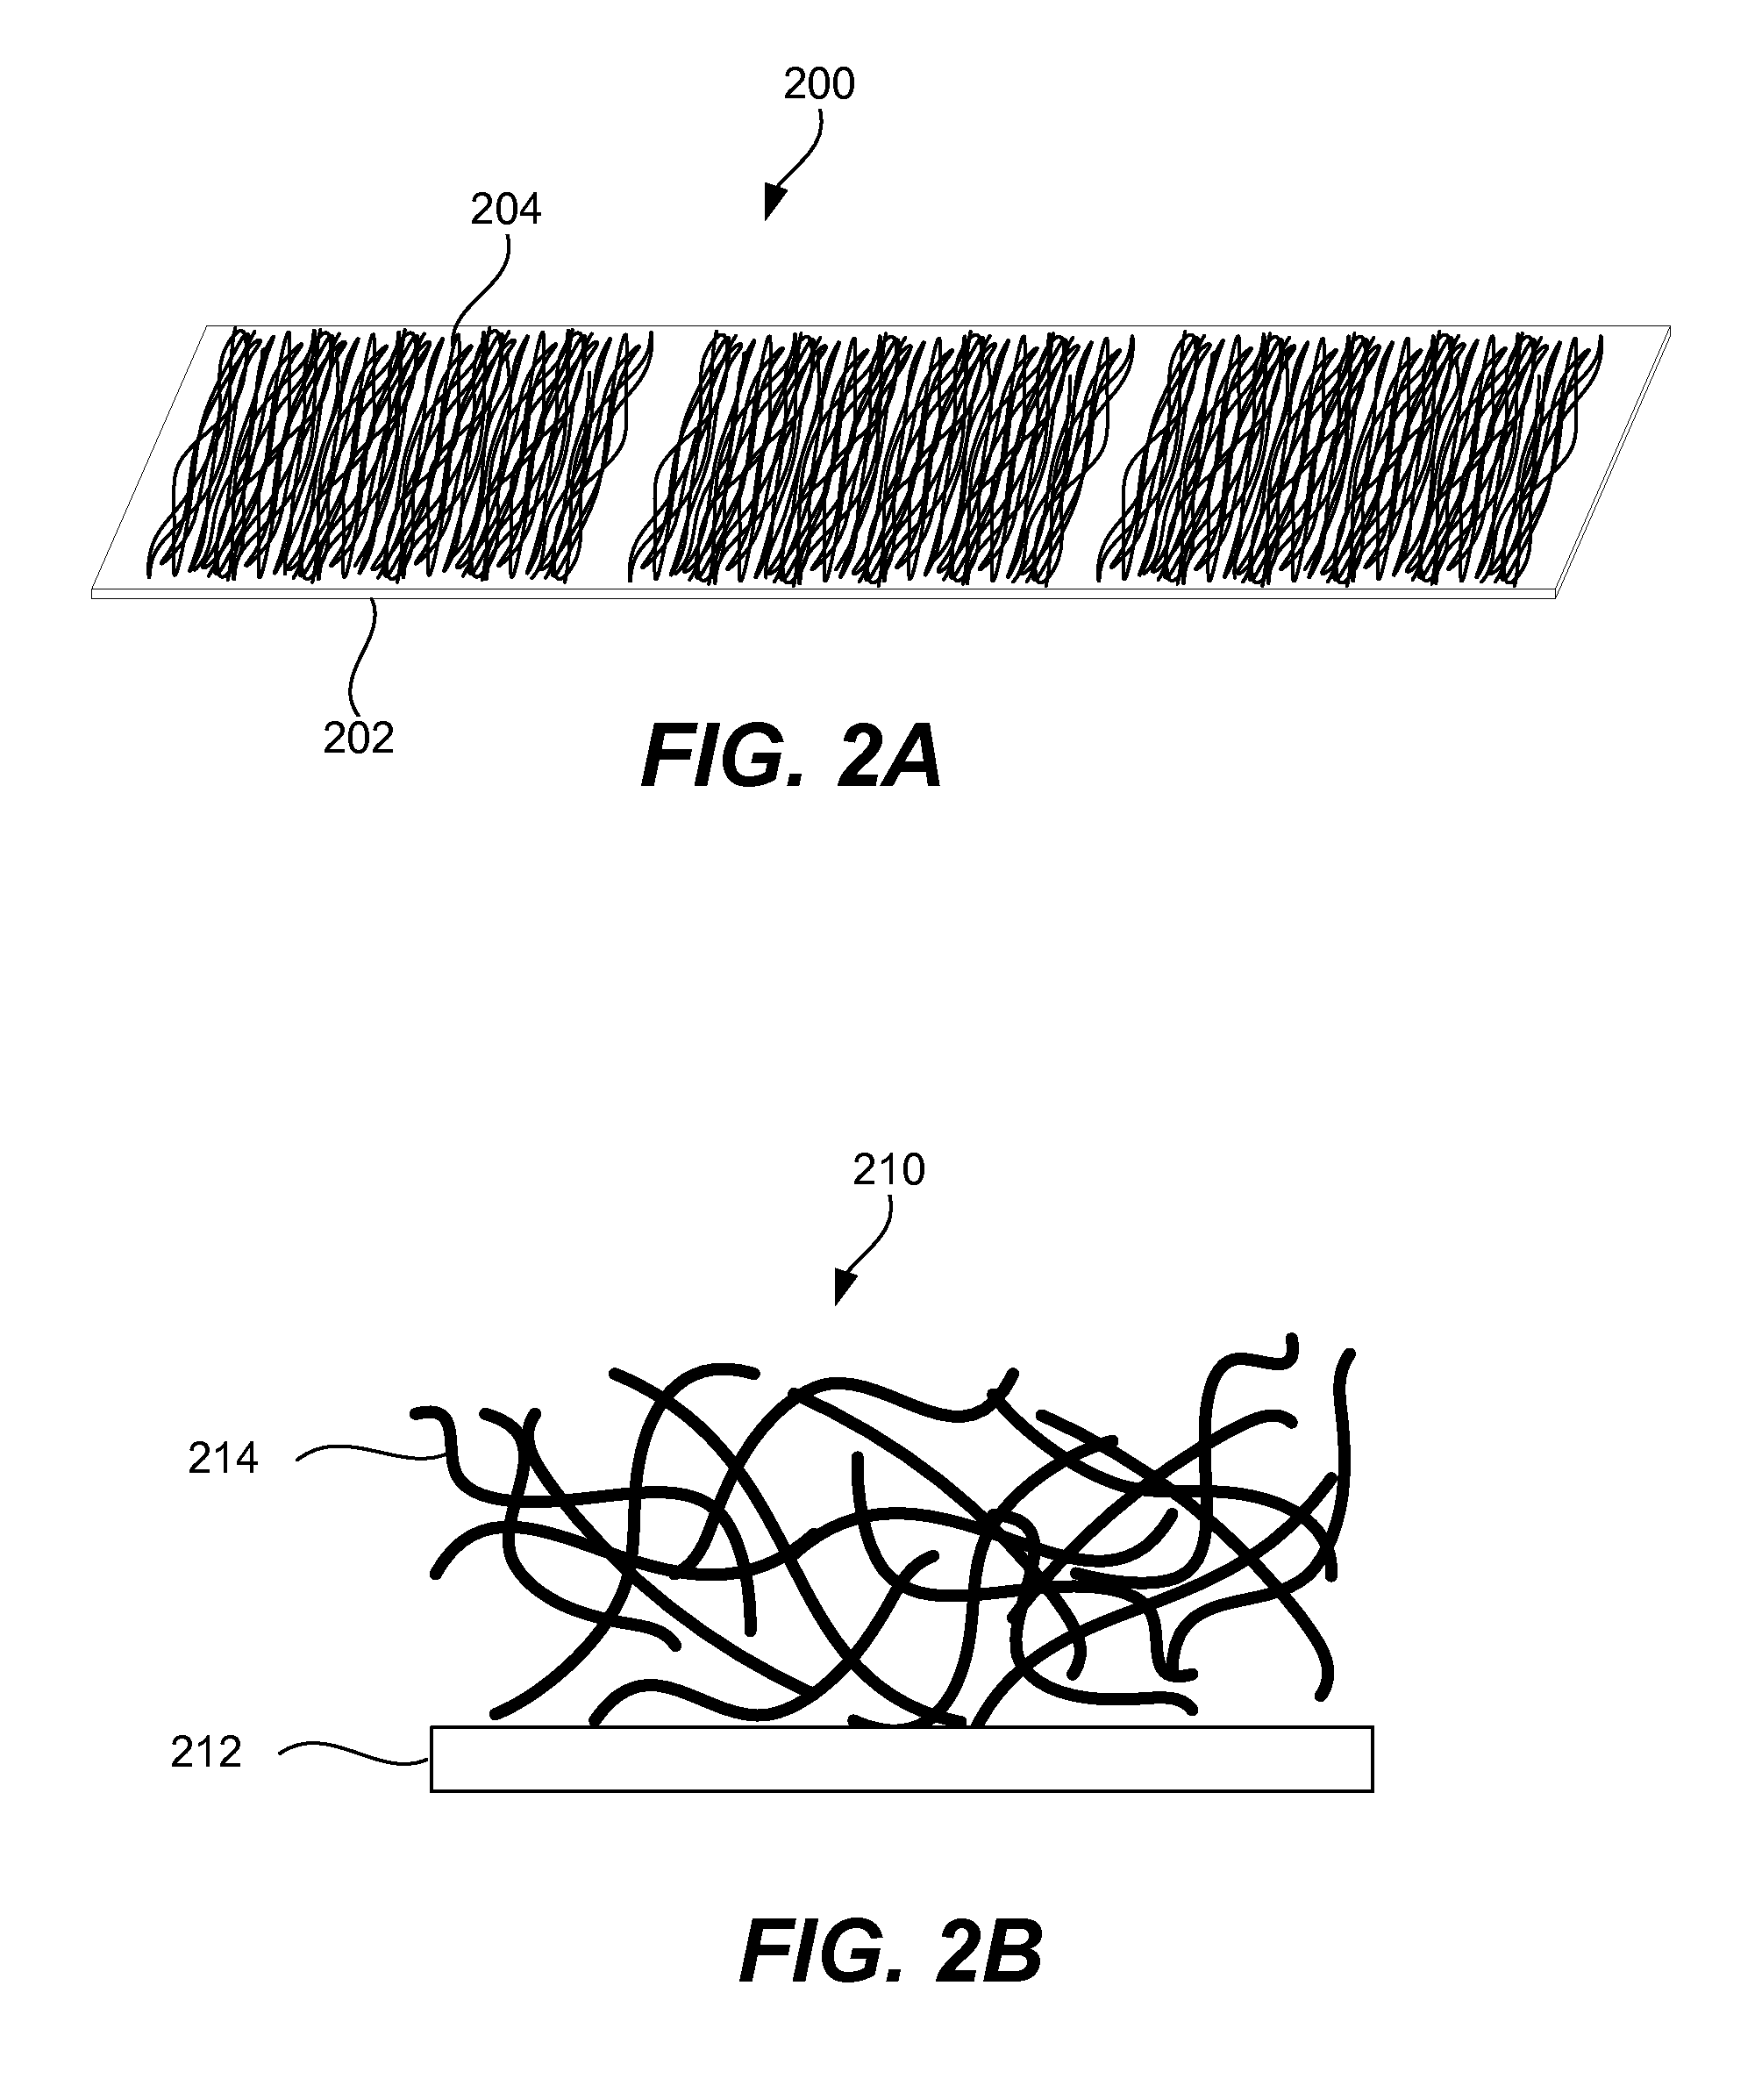 Interconnected hollow nanostructures containing high capacity active materials for use in rechargeable batteries